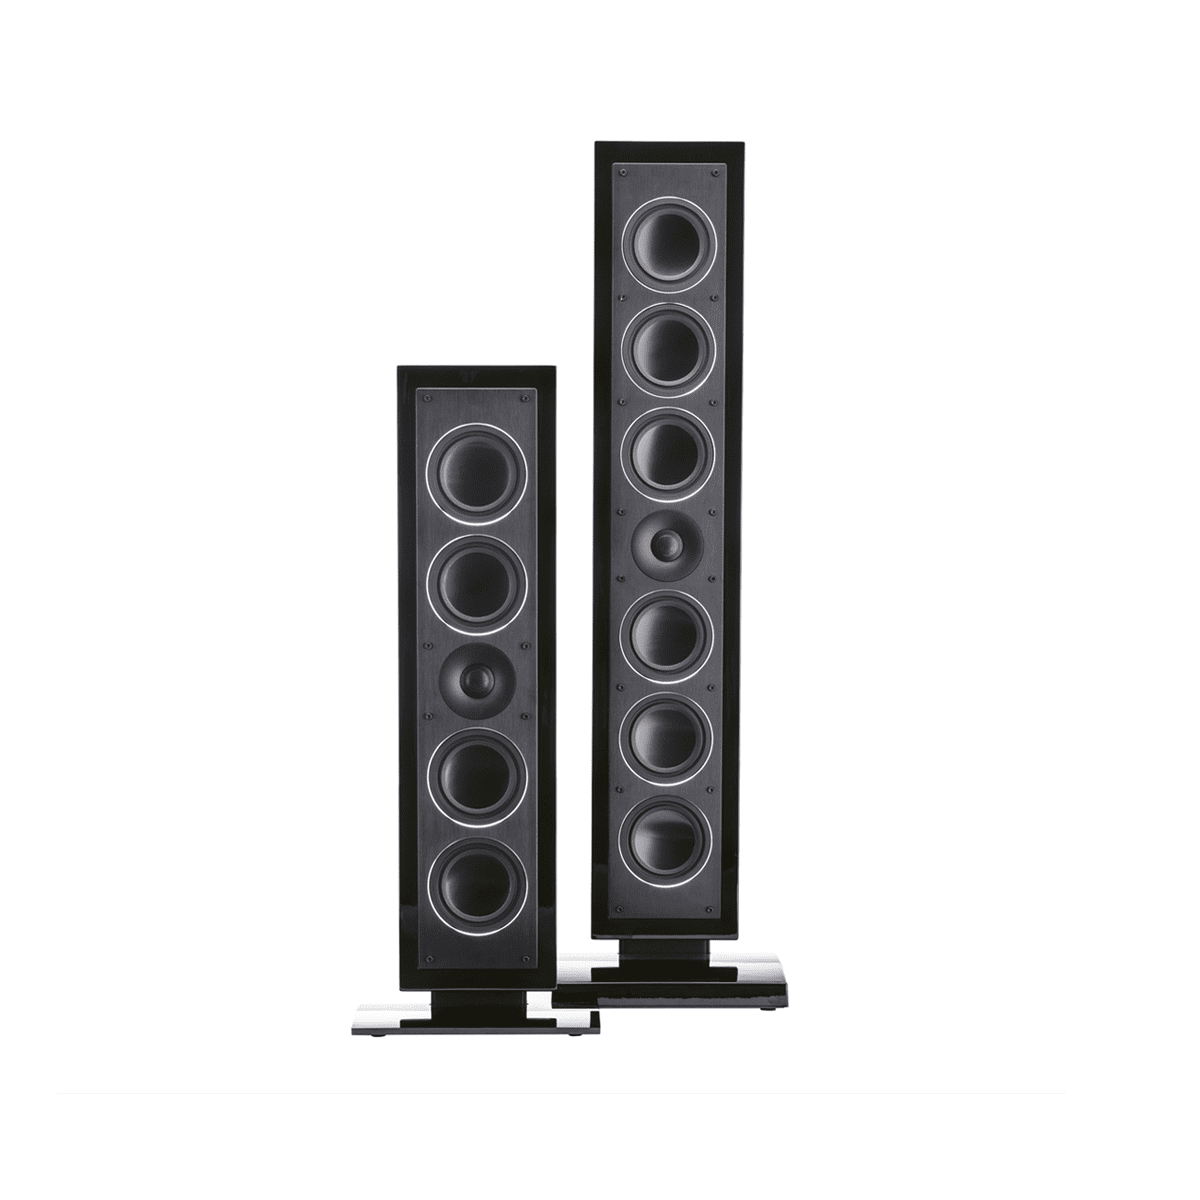 Paradigm Millenia LP XL LCR On Wall Speaker front view vertical and no grill